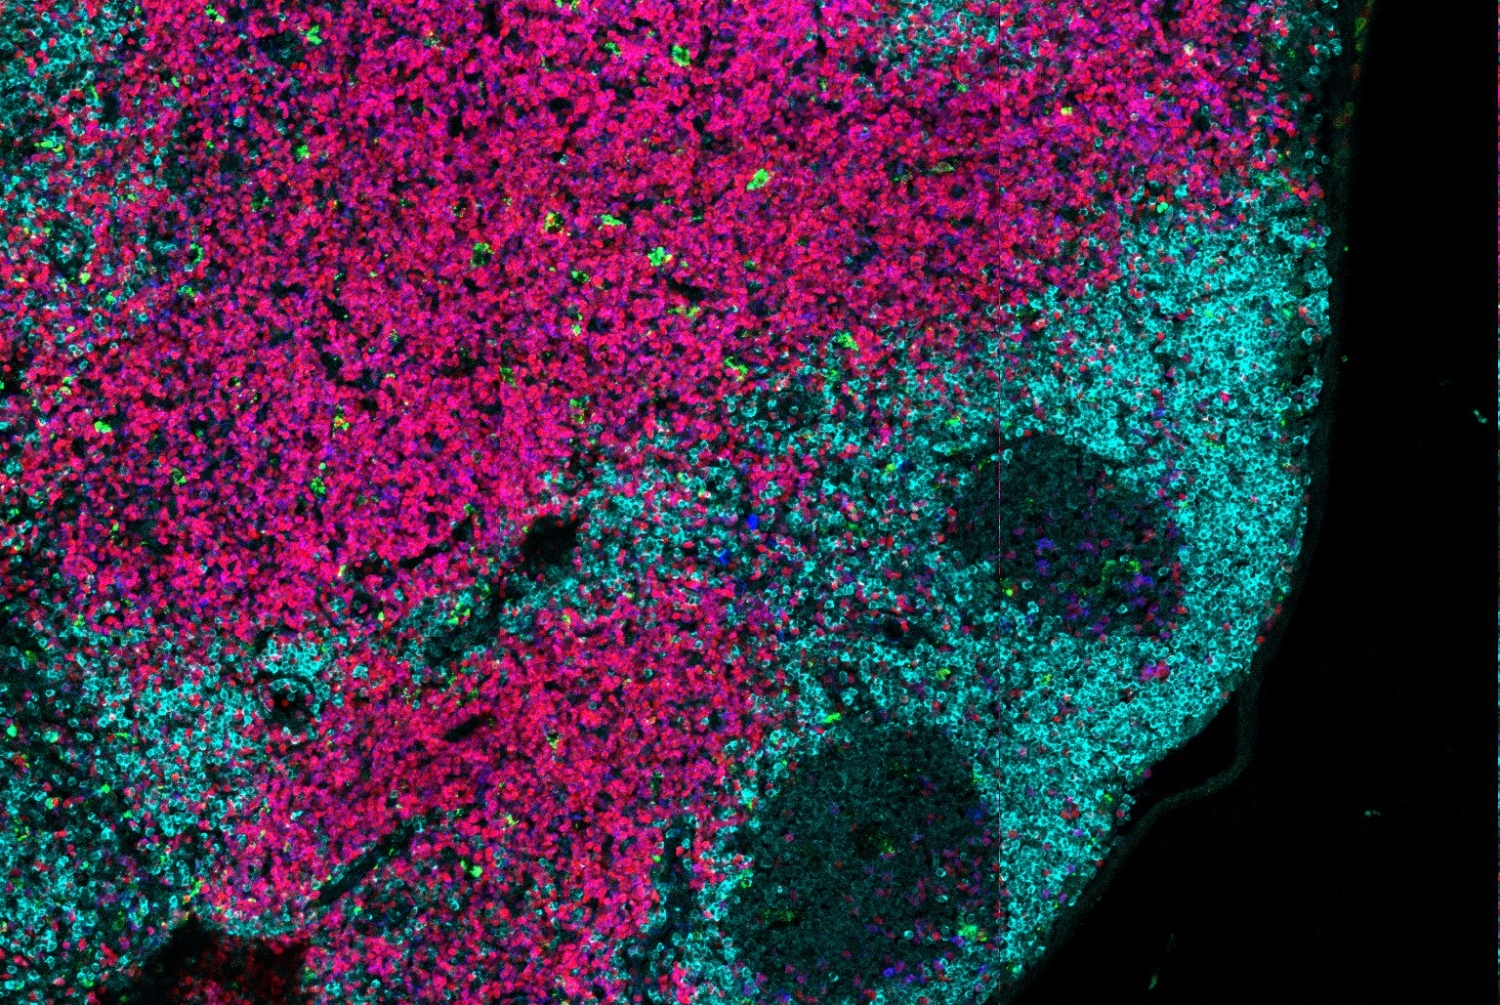 Visualizing innate lymphoid cells in the mouse lymph node: ILCs (green), B cells (cyan), T cells (magenta). Image courtesy of Dr. Saya Moriyama and Dr. David Artis